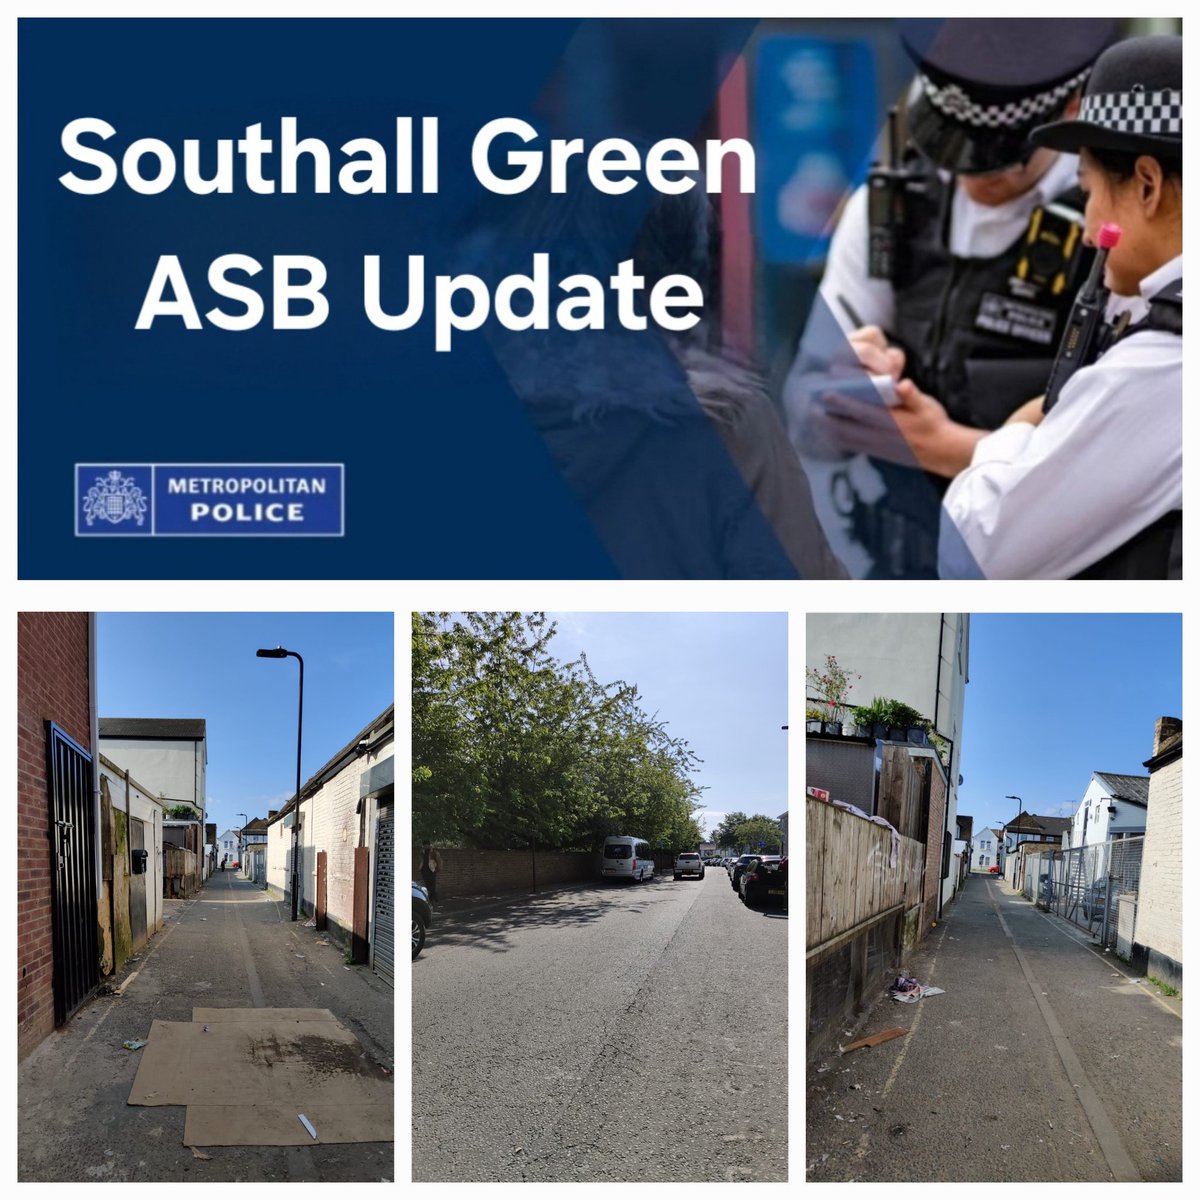 The team patrolled Dagmar Mews and Guru Nanak Road today, targeting the ongoing ASB and drug use. We are aware of the ongoing issues and will continue to deal with offenders who are disrespecting the local area robustly #notonourwatch